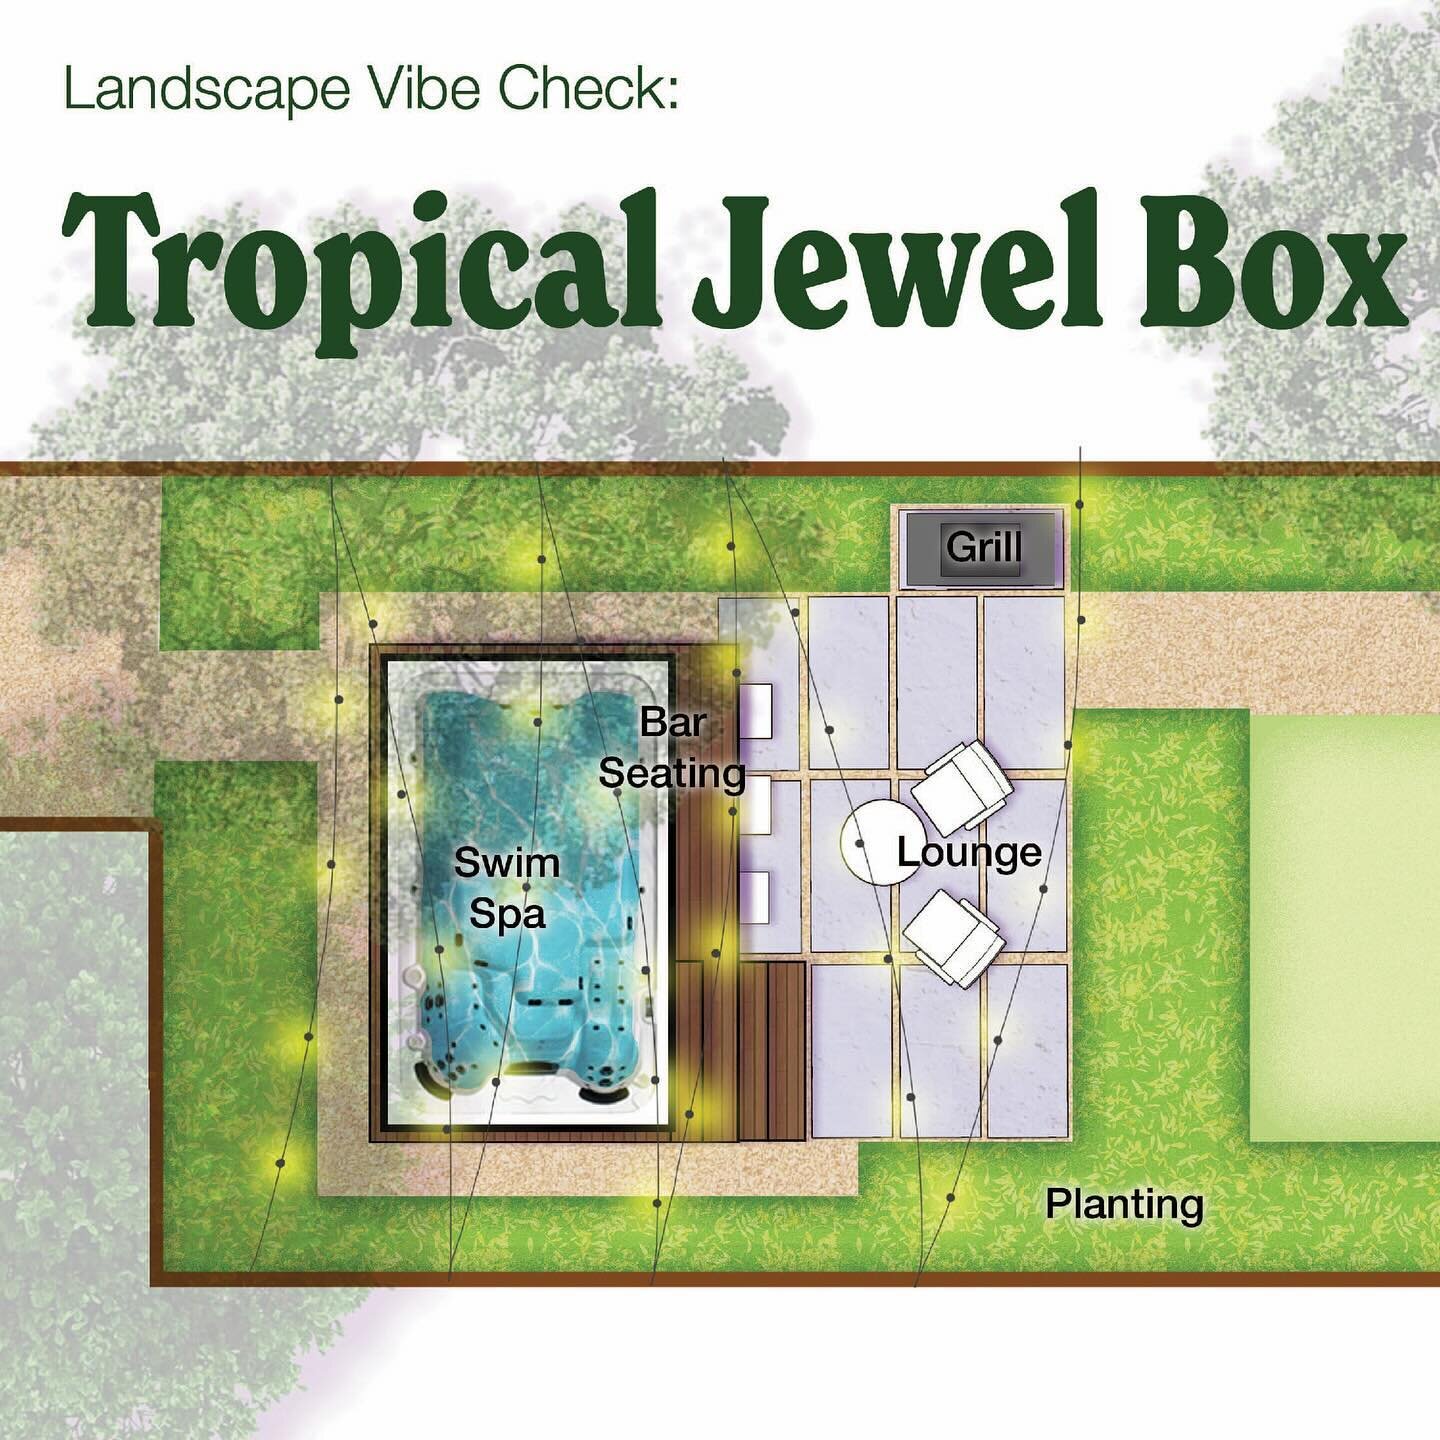 Loving this tropical jewel box vibe we&rsquo;ve developed for our recent clients! We&rsquo;re leaning into a lush, tropical, verdant look, while utilizing a native and adapted plant palette for easy maintenance. 🌴🌿✅

#austinlandscape #oasis #tropic